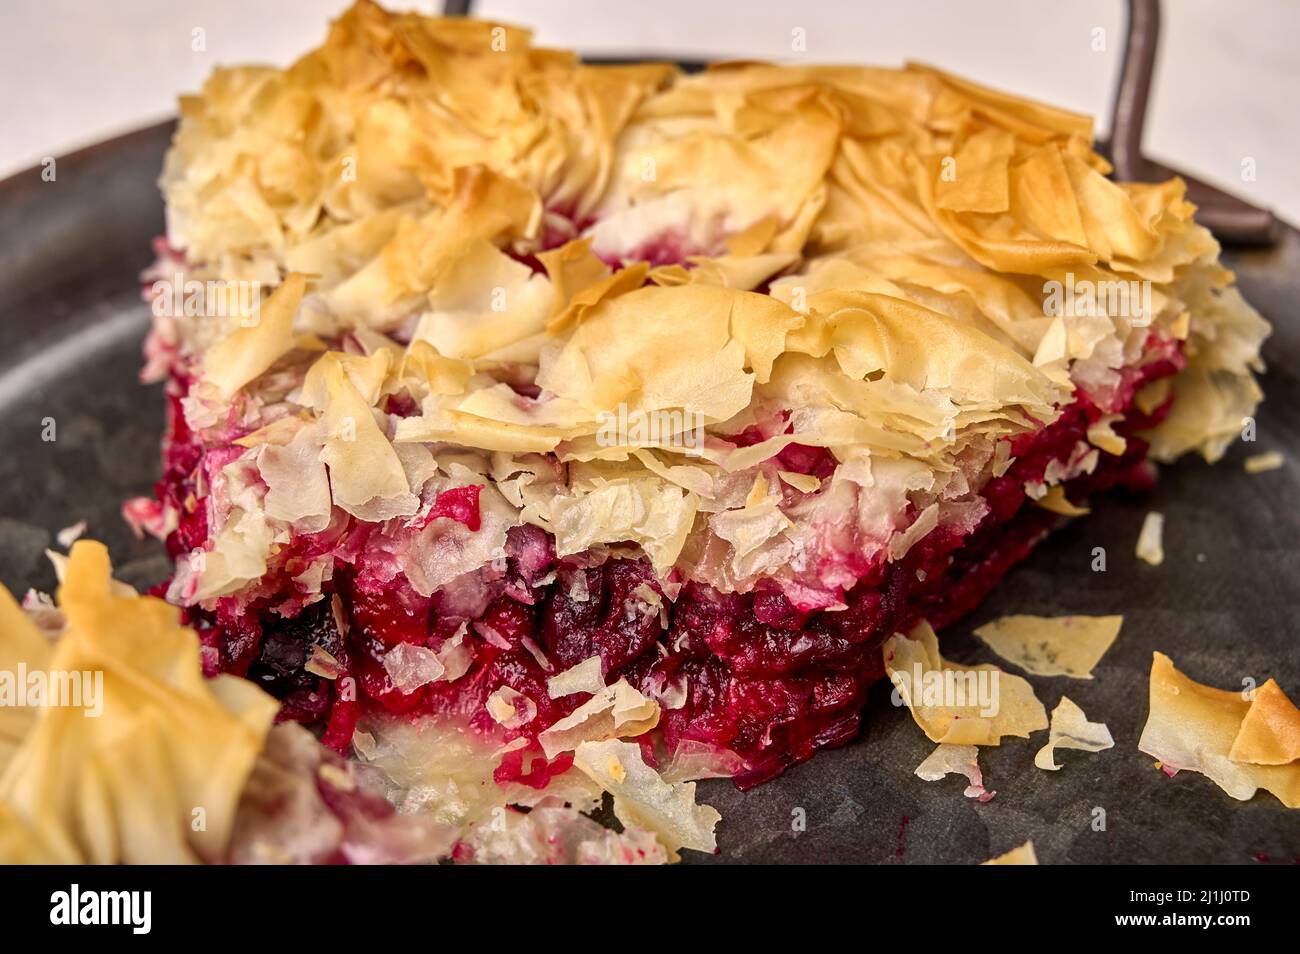 Piece of homemade cherry pie from filo dough with a view of the filling. Selective focus, close up Stock Photo